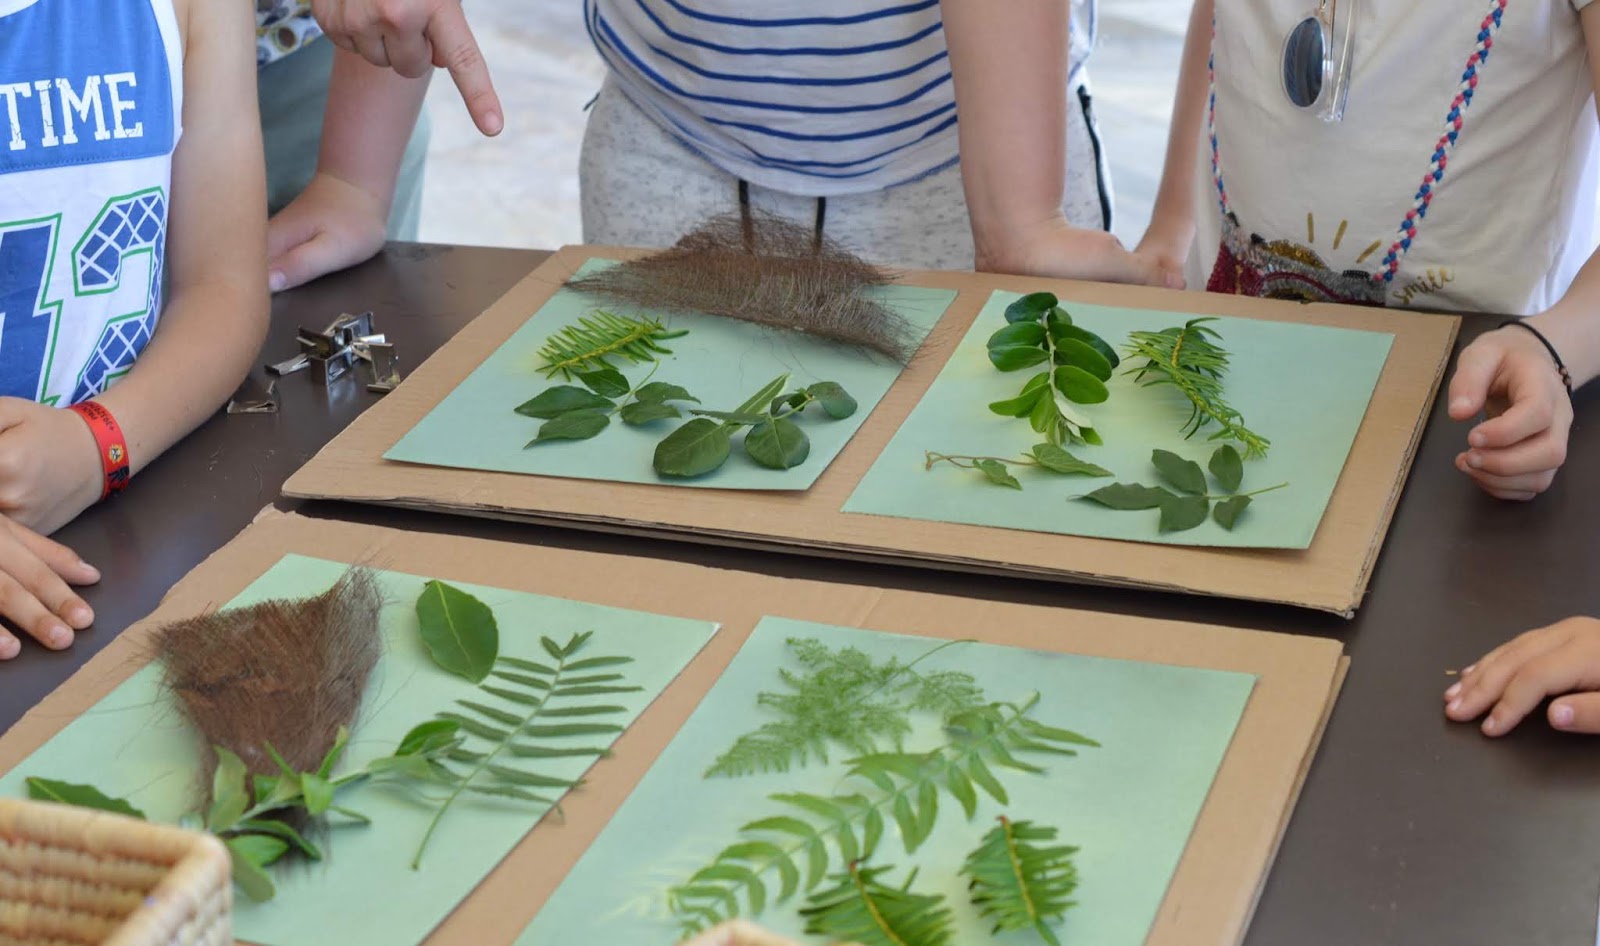 How to spend a weekend in Genoa with kids - Nervi cyanotype technique at museum